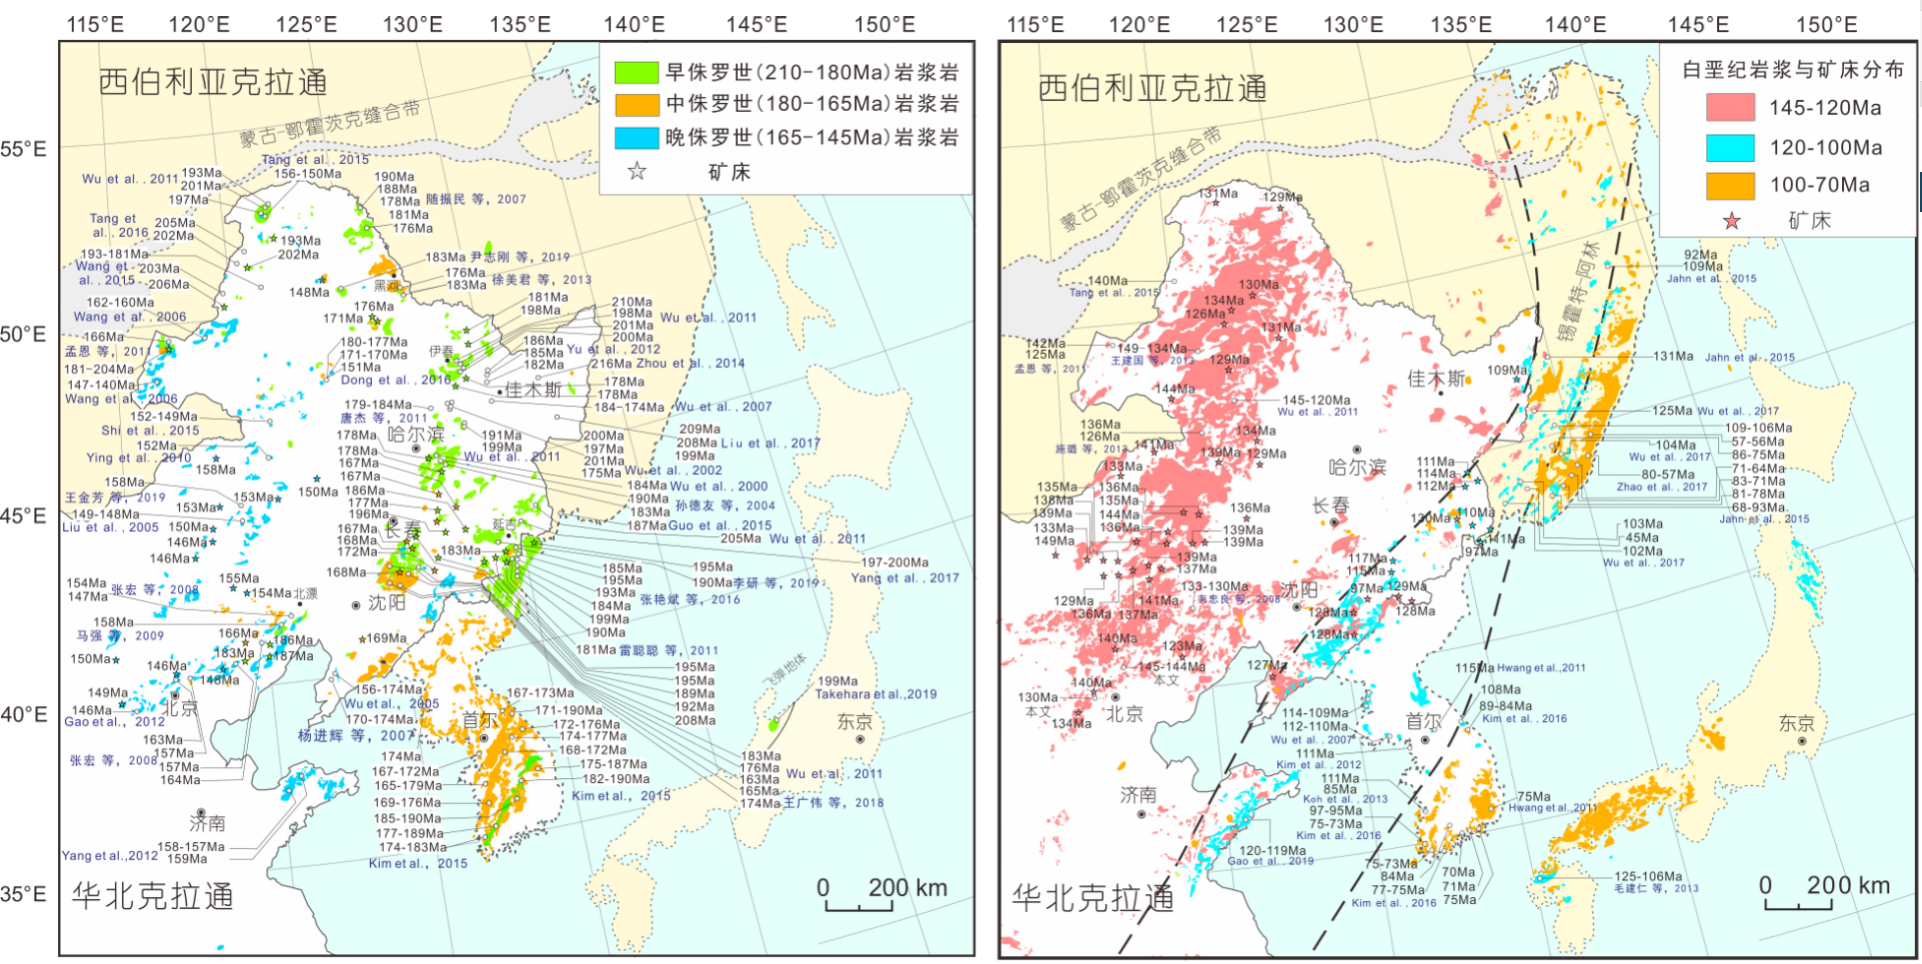 Temporal and spatial distribution map of Yanshanian tectonic-magmatic-deposits in Northeast Asia